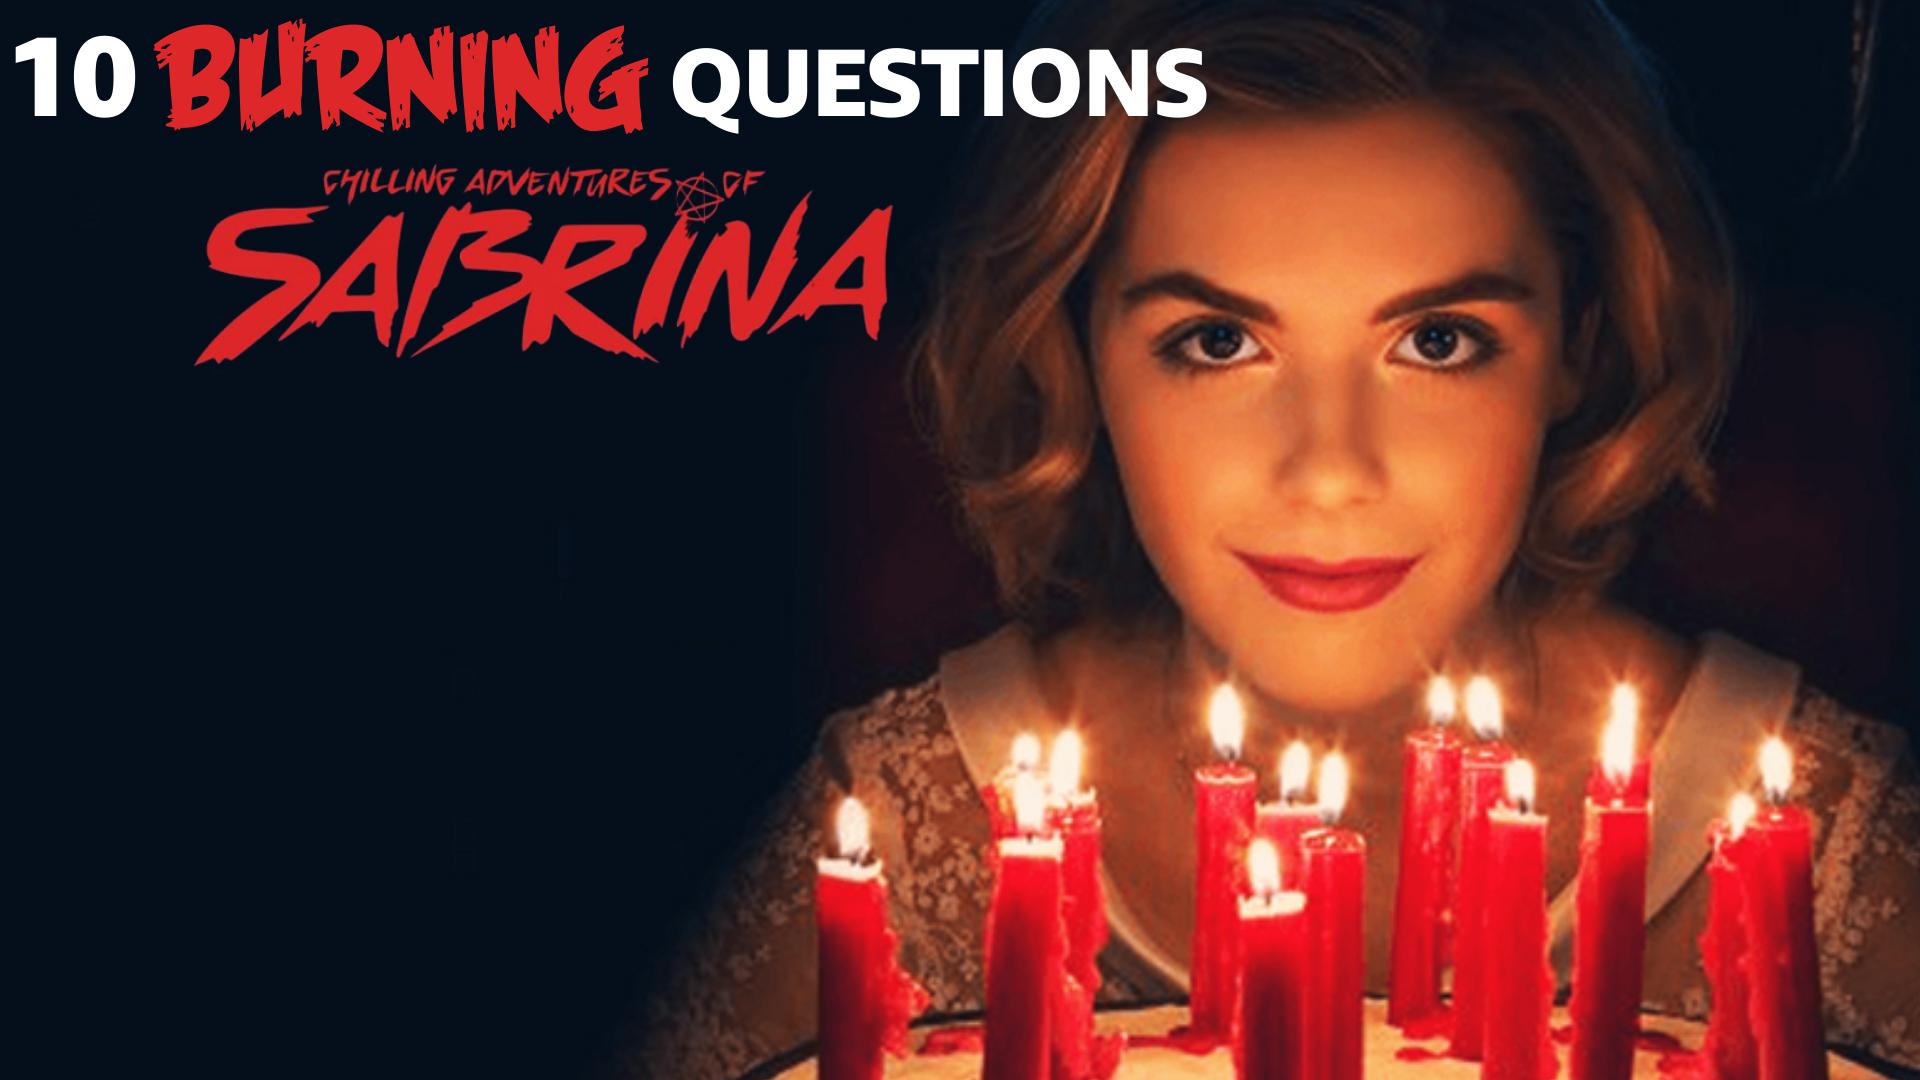 Burning Questions After Watching Chilling Adventures of Sabrina